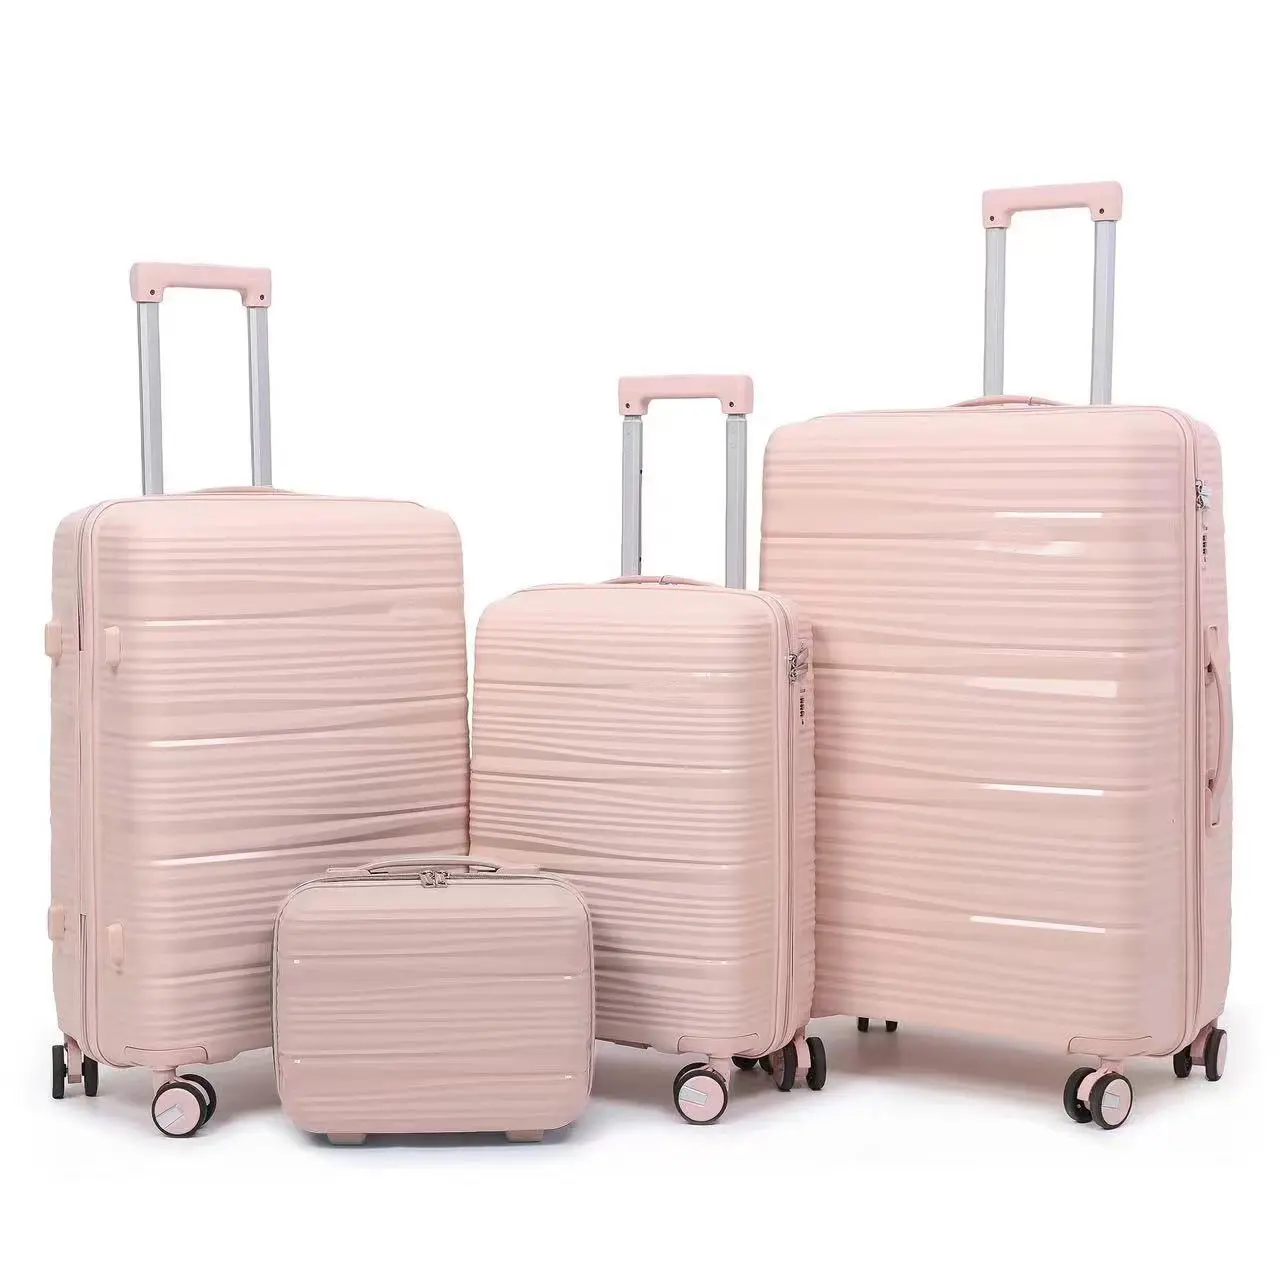 4 sets Travel Luggage with scratch-resistant PP material Business Luggage Set For Men women Super light PP Bag